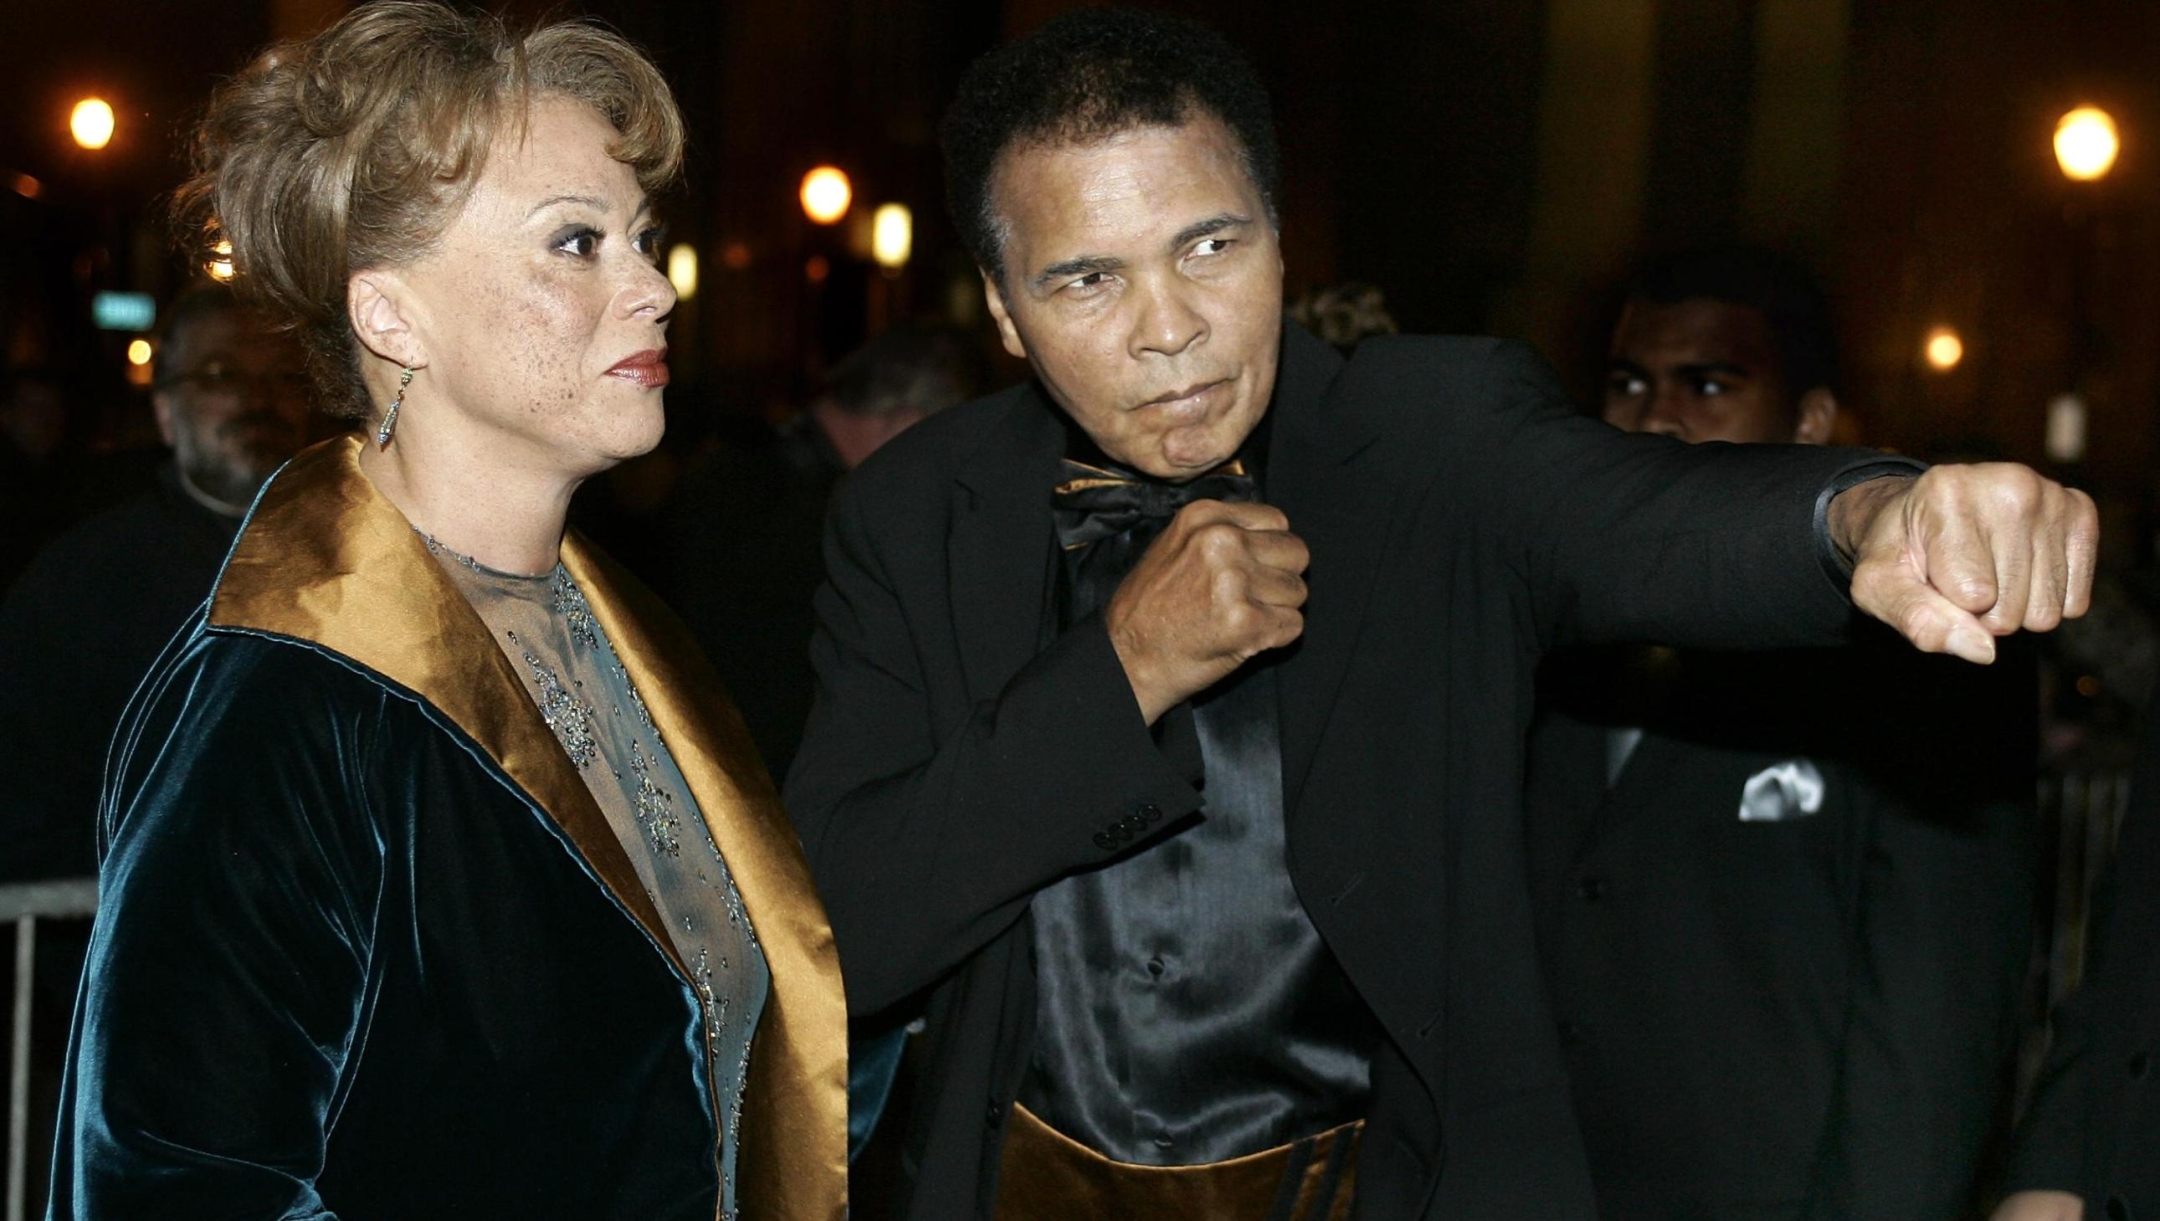 US boxing legend Muhammad Ali (R) strikes a boxing pose on the red carpet with his wife Lonnie, 19 November 2005, before the Grand Opening Gala for the Muhammad Ali Center at the Kentucky Center in Louisville, KY.  The Ali Center will open to the public, 21 November 2005, costing 80 million USD for the 93,000 square-foot six level center to be used as a "global gathering place" to promote peace and tolerance, and to inspire people to reach their potential.    AFP PHOTO/JEFF HAYNES